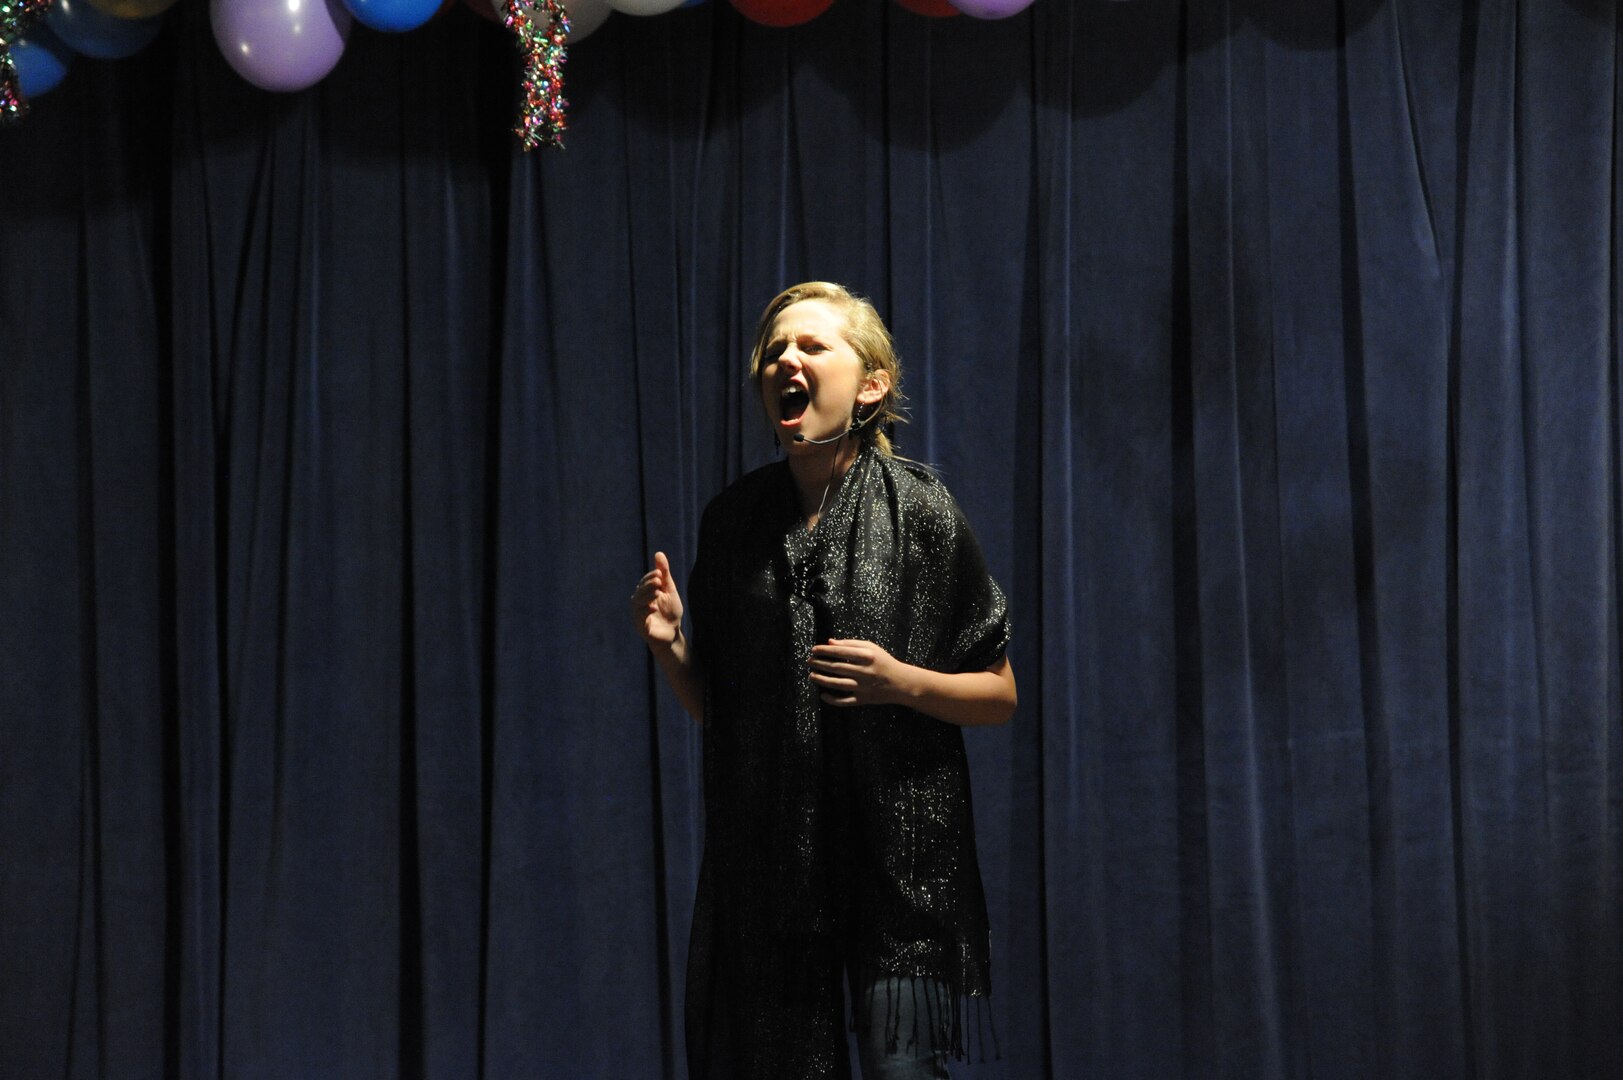 Katryna Marttala, singing “Listen” by Beyonce, placed first in the Pre-Teen Solo category at the You Got Talent Family Teen Talent Contest at the base Airman and Family Readiness Center Feb. 17. (U.S. Air Force photo/Rich McFadden) (released)